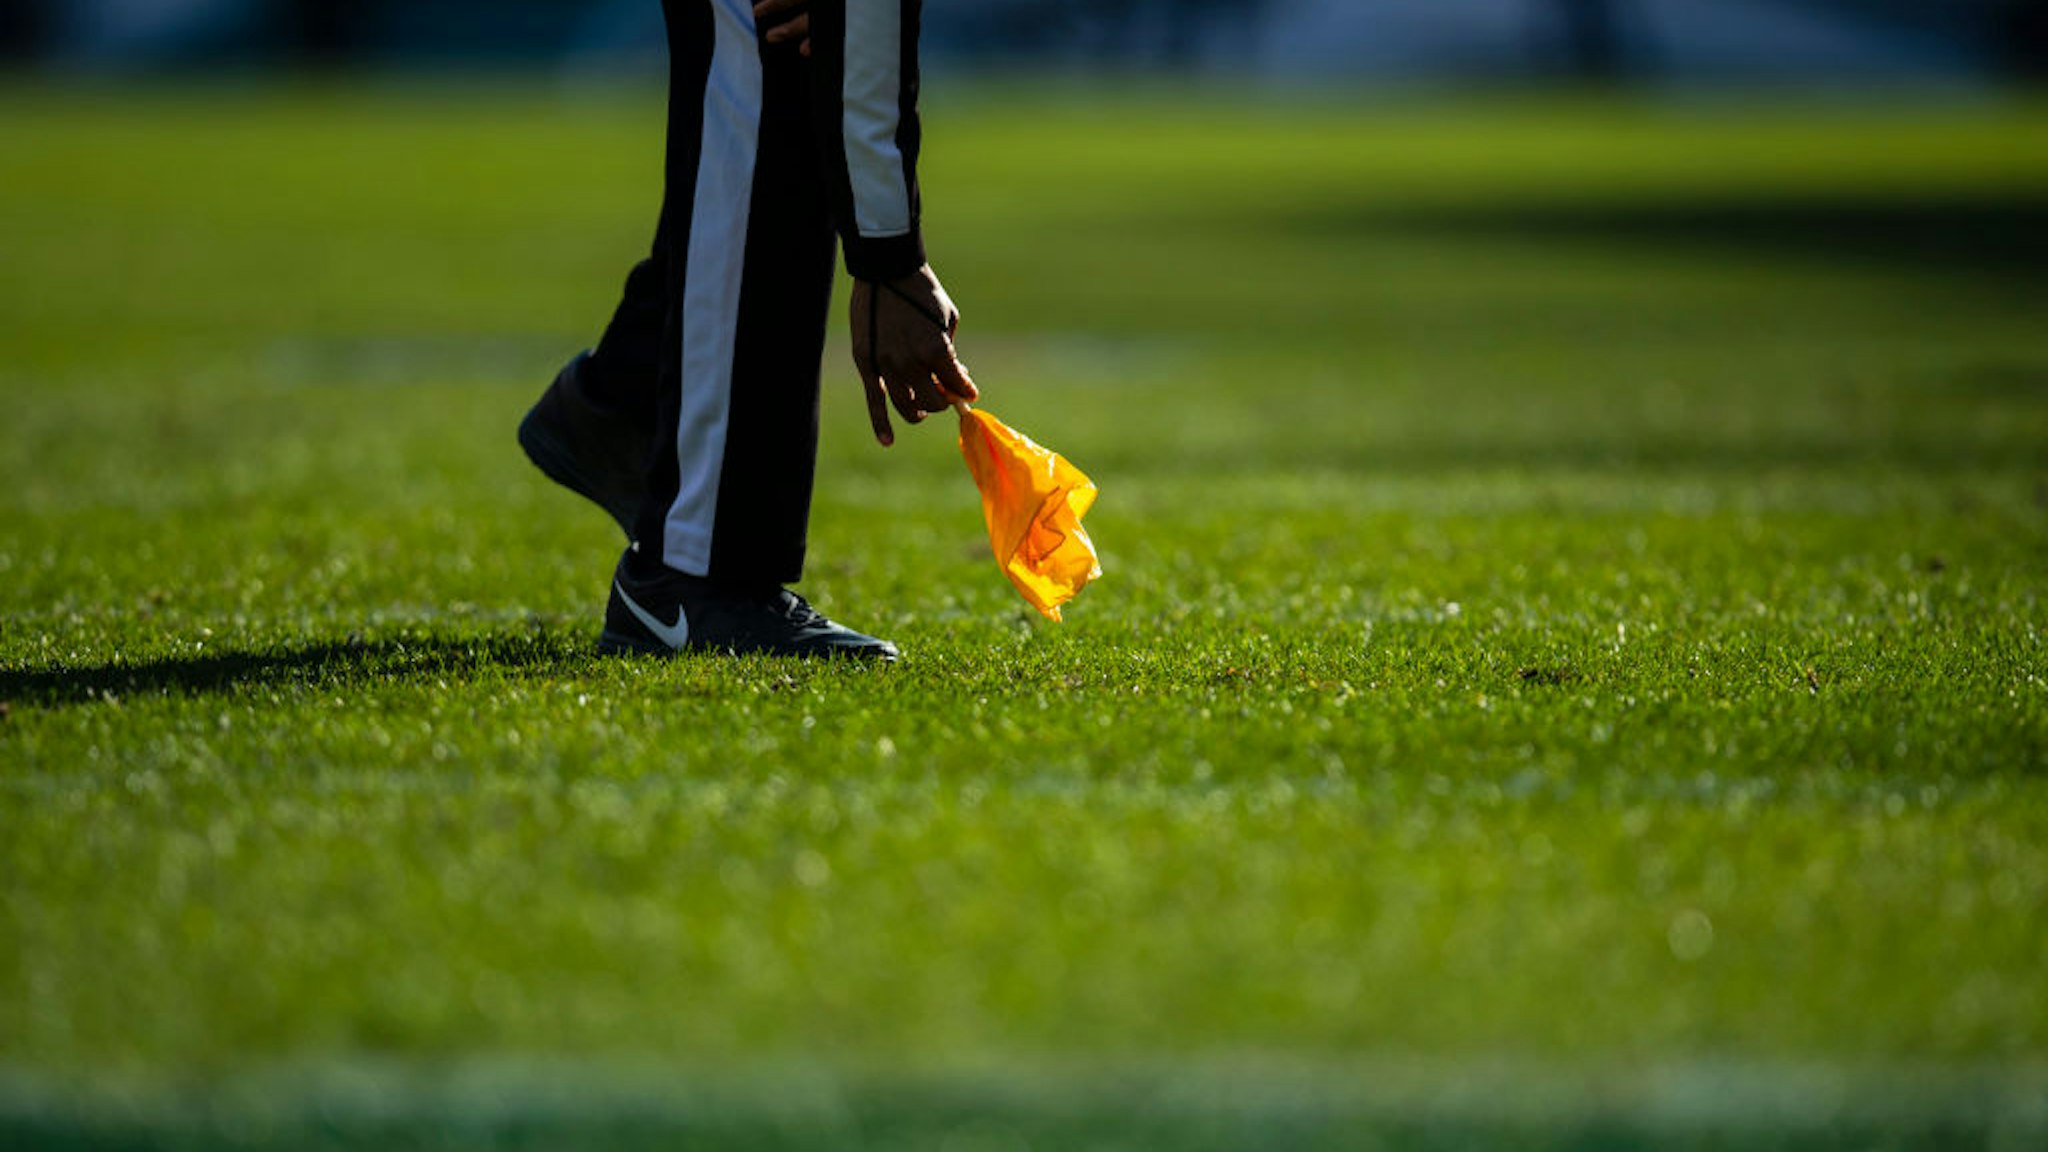 A referee picks up a yellow penalty flag during the game between the Philadelphia Eagles and the Houston Texans at Lincoln Financial Field on December 23, 2018 in Philadelphia, Pennsylvania. Photo by Brett Carlsen/Getty Images